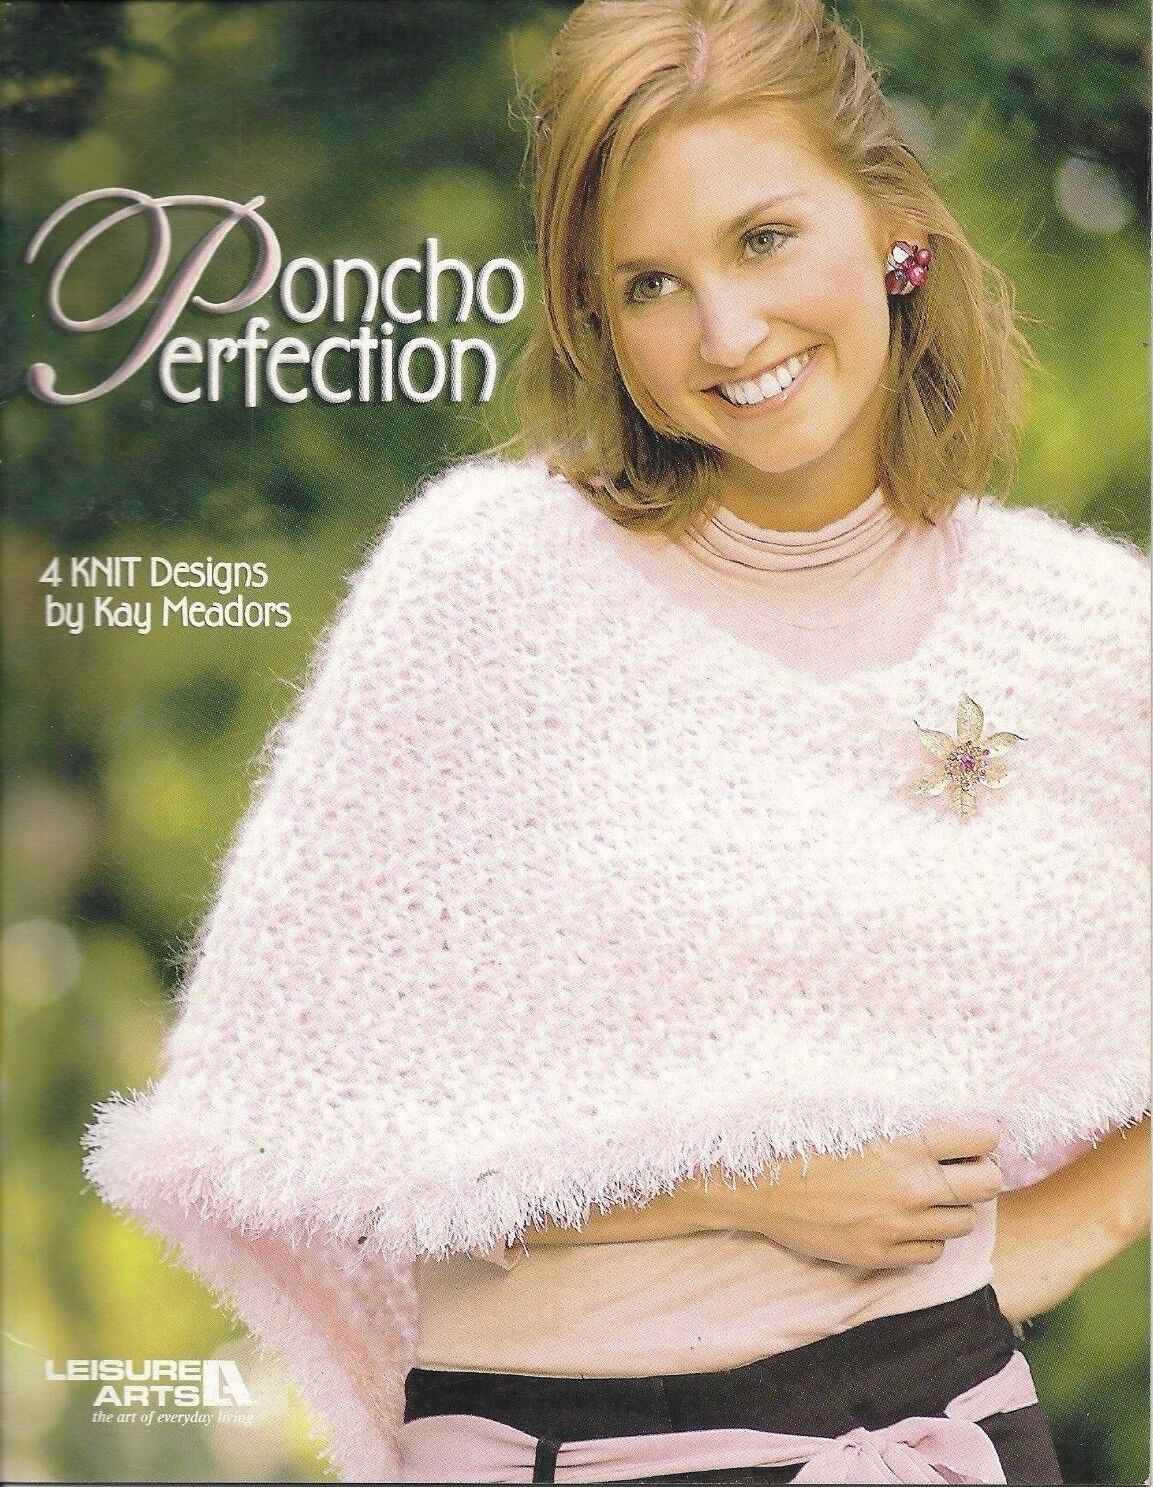 Leisure Arts Poncho Perfection 4 Knit Design Pattern Projects Kay Meadors 2004 - $7.30